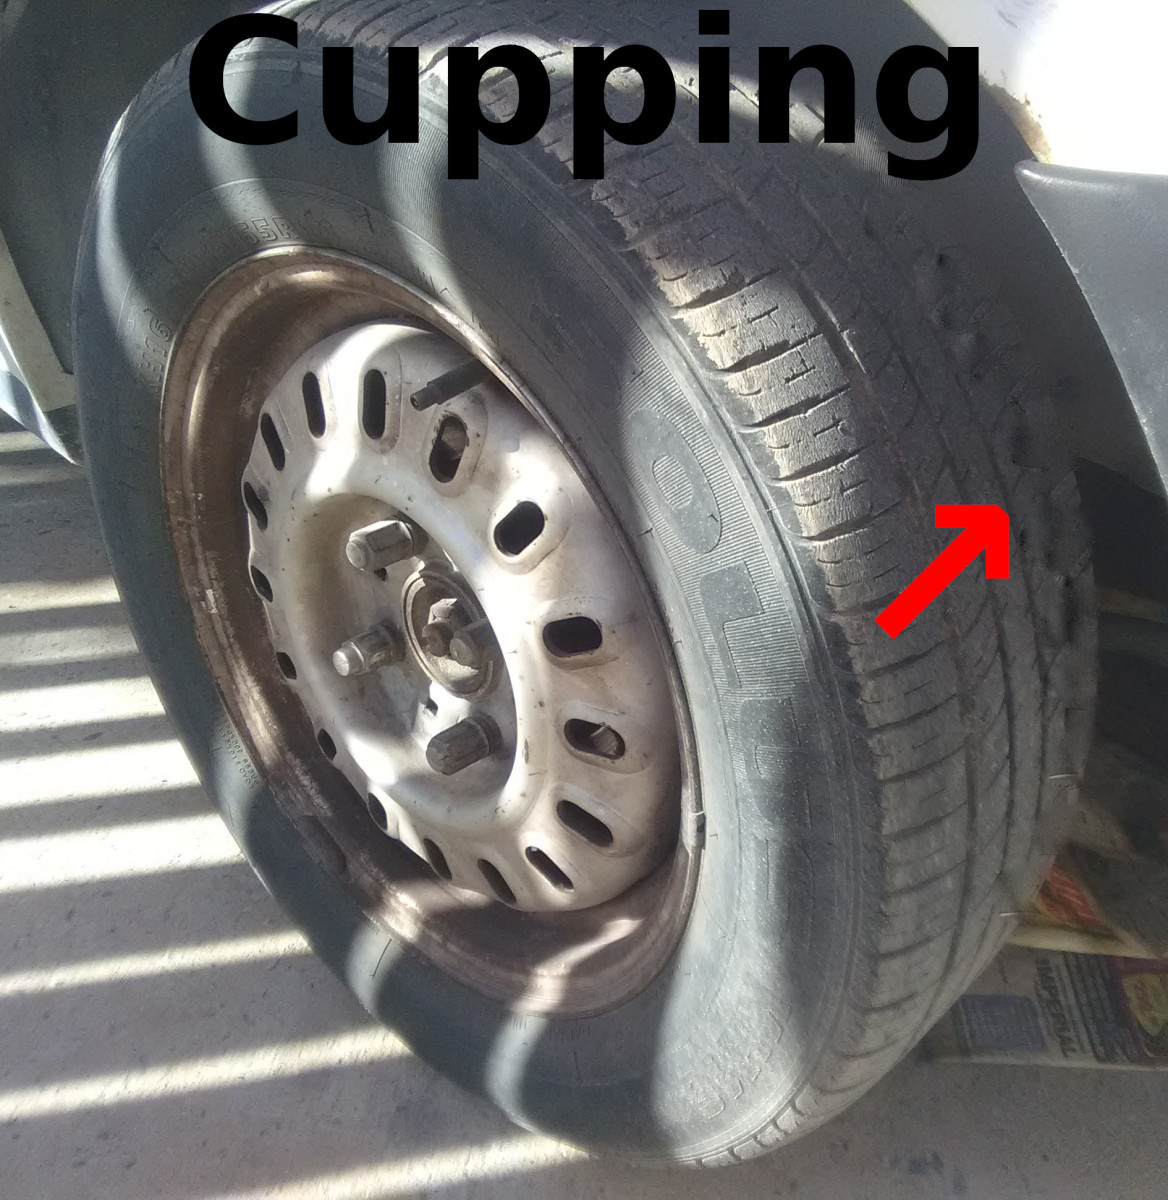 Improper wheel balance may lead to a cupping wear pattern.